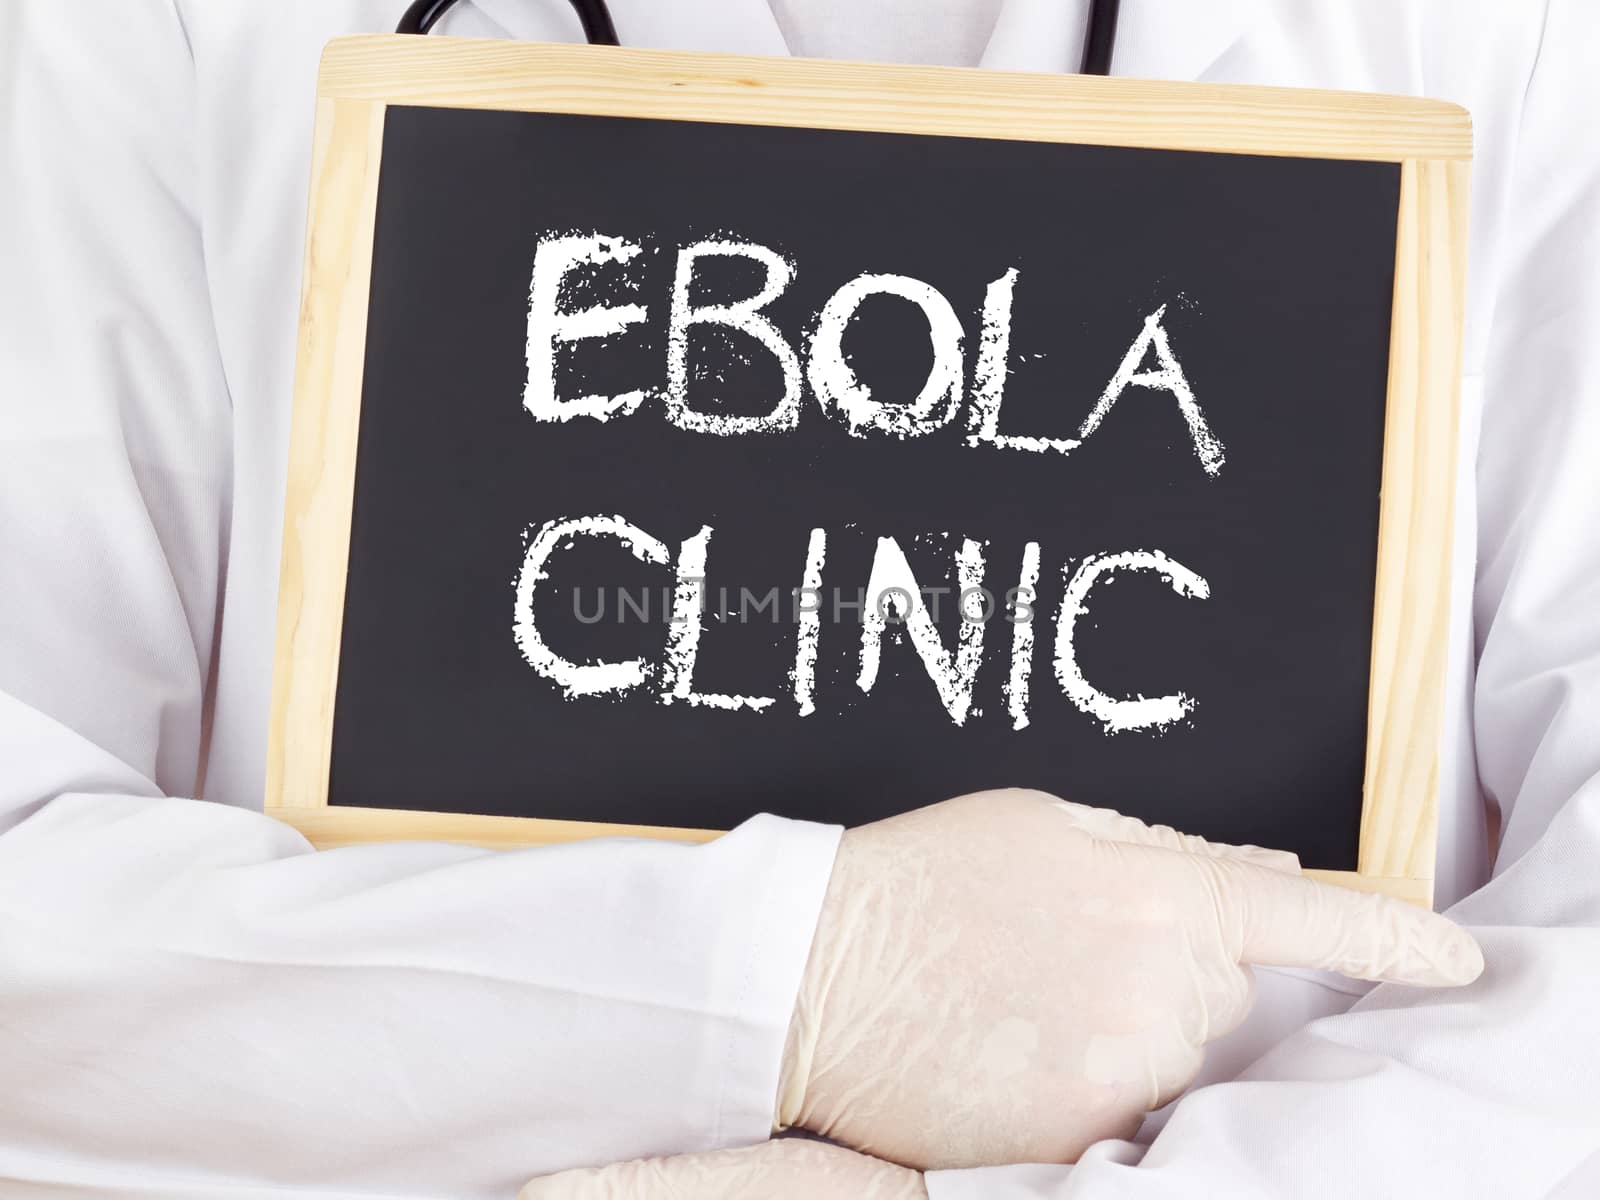 Doctor shows information: Ebola clinic